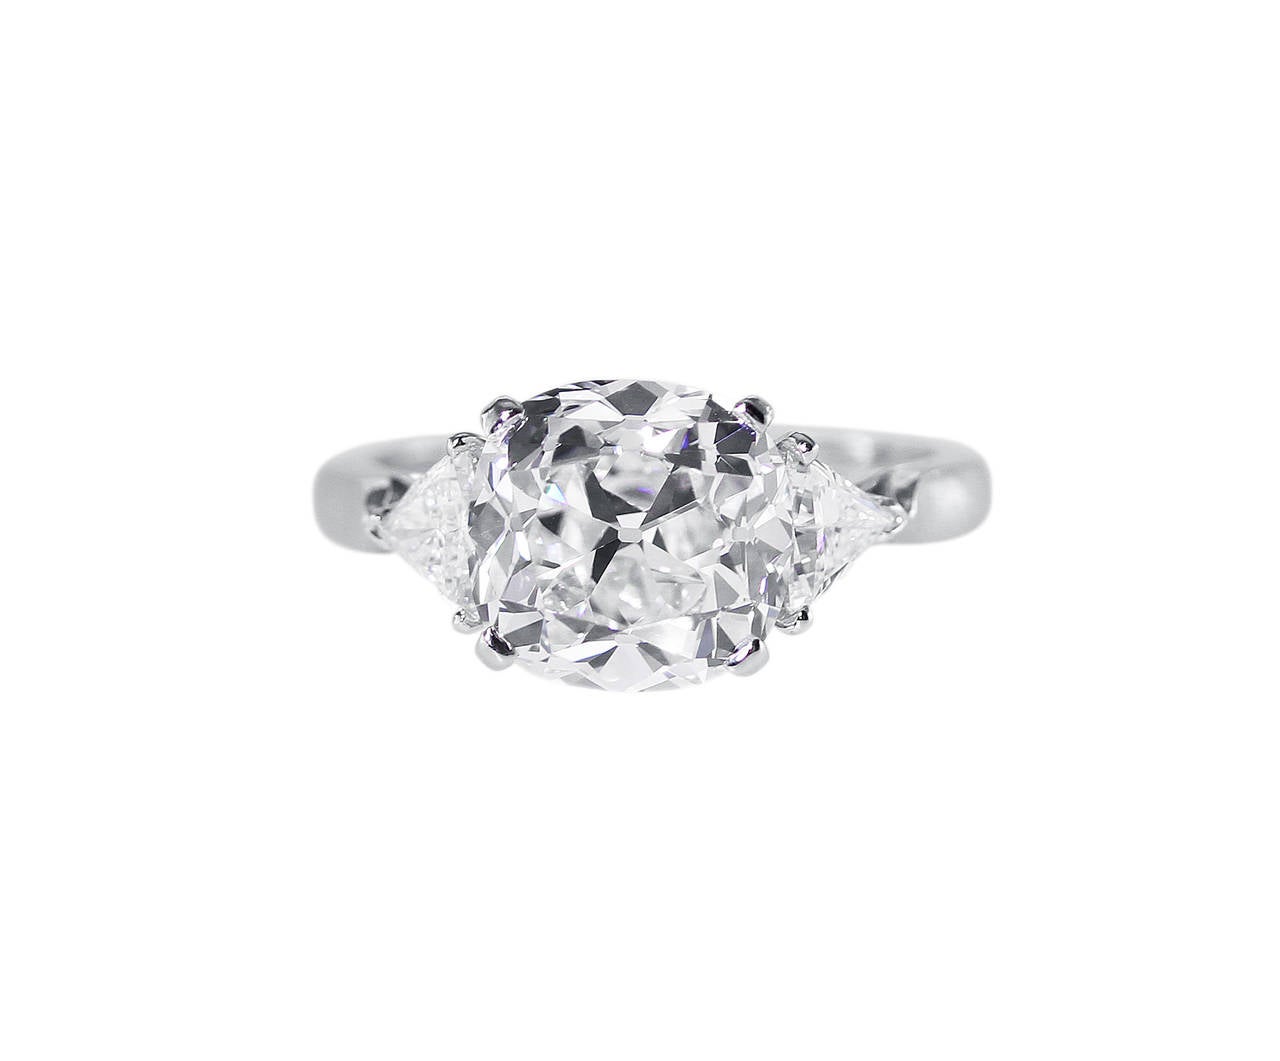 This stunning engagement ring is of superior quality and craftsmanship, all original, and made by the firm Van Cleef & Arpels.  Using only the best stones and materials, this ring features an old mine cut diamond weighing 4.02 carats which is of E